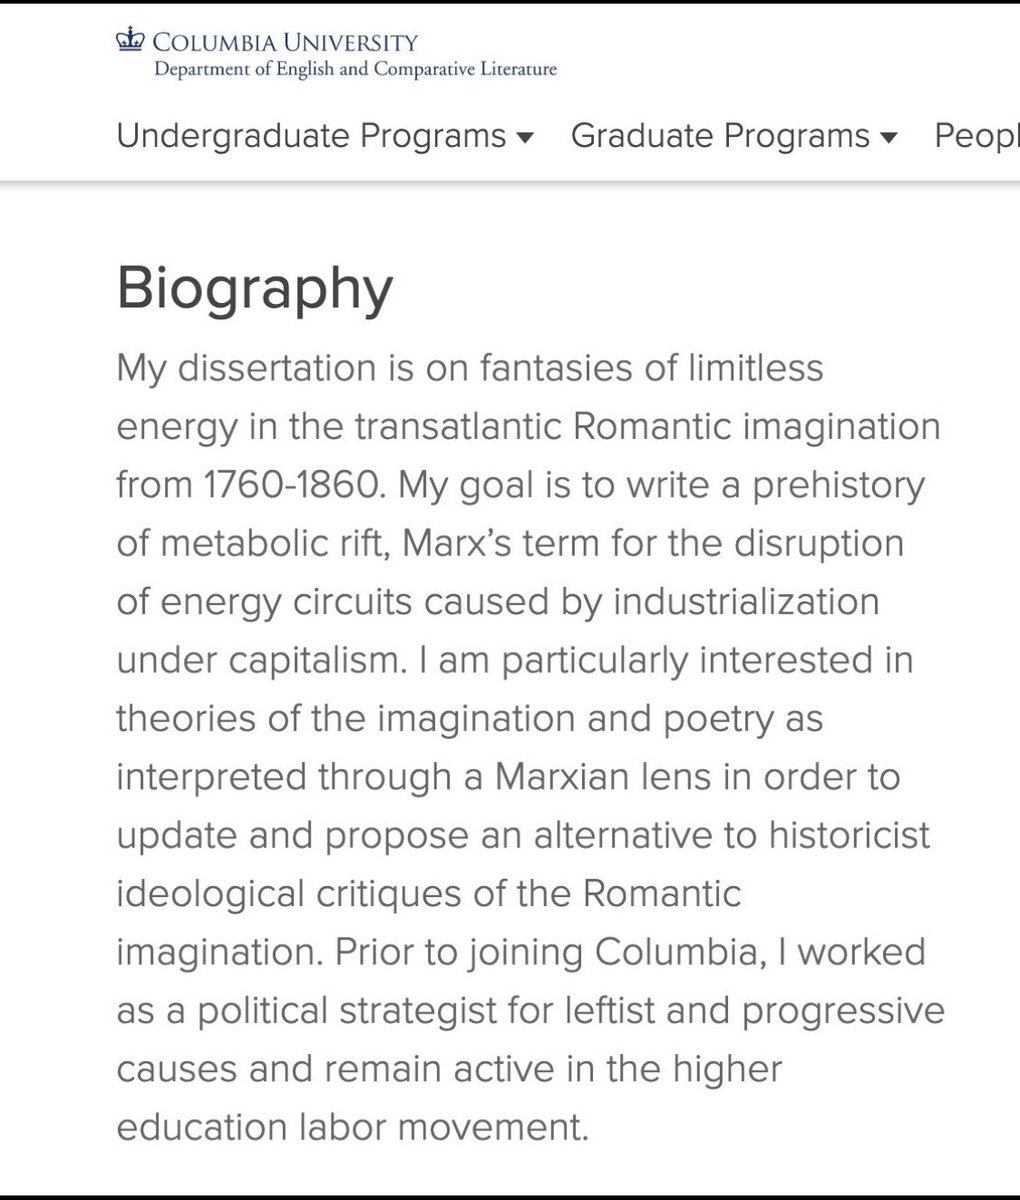 The Ivy League student, who bravely demanded humanitarian aid from her oppressors at Columbia University, is writing a dissertation about “the fantasies of limitless energy in the Romantic imagination…a prehistory of metabolic rift, Marx’s term for the disruption of energy…